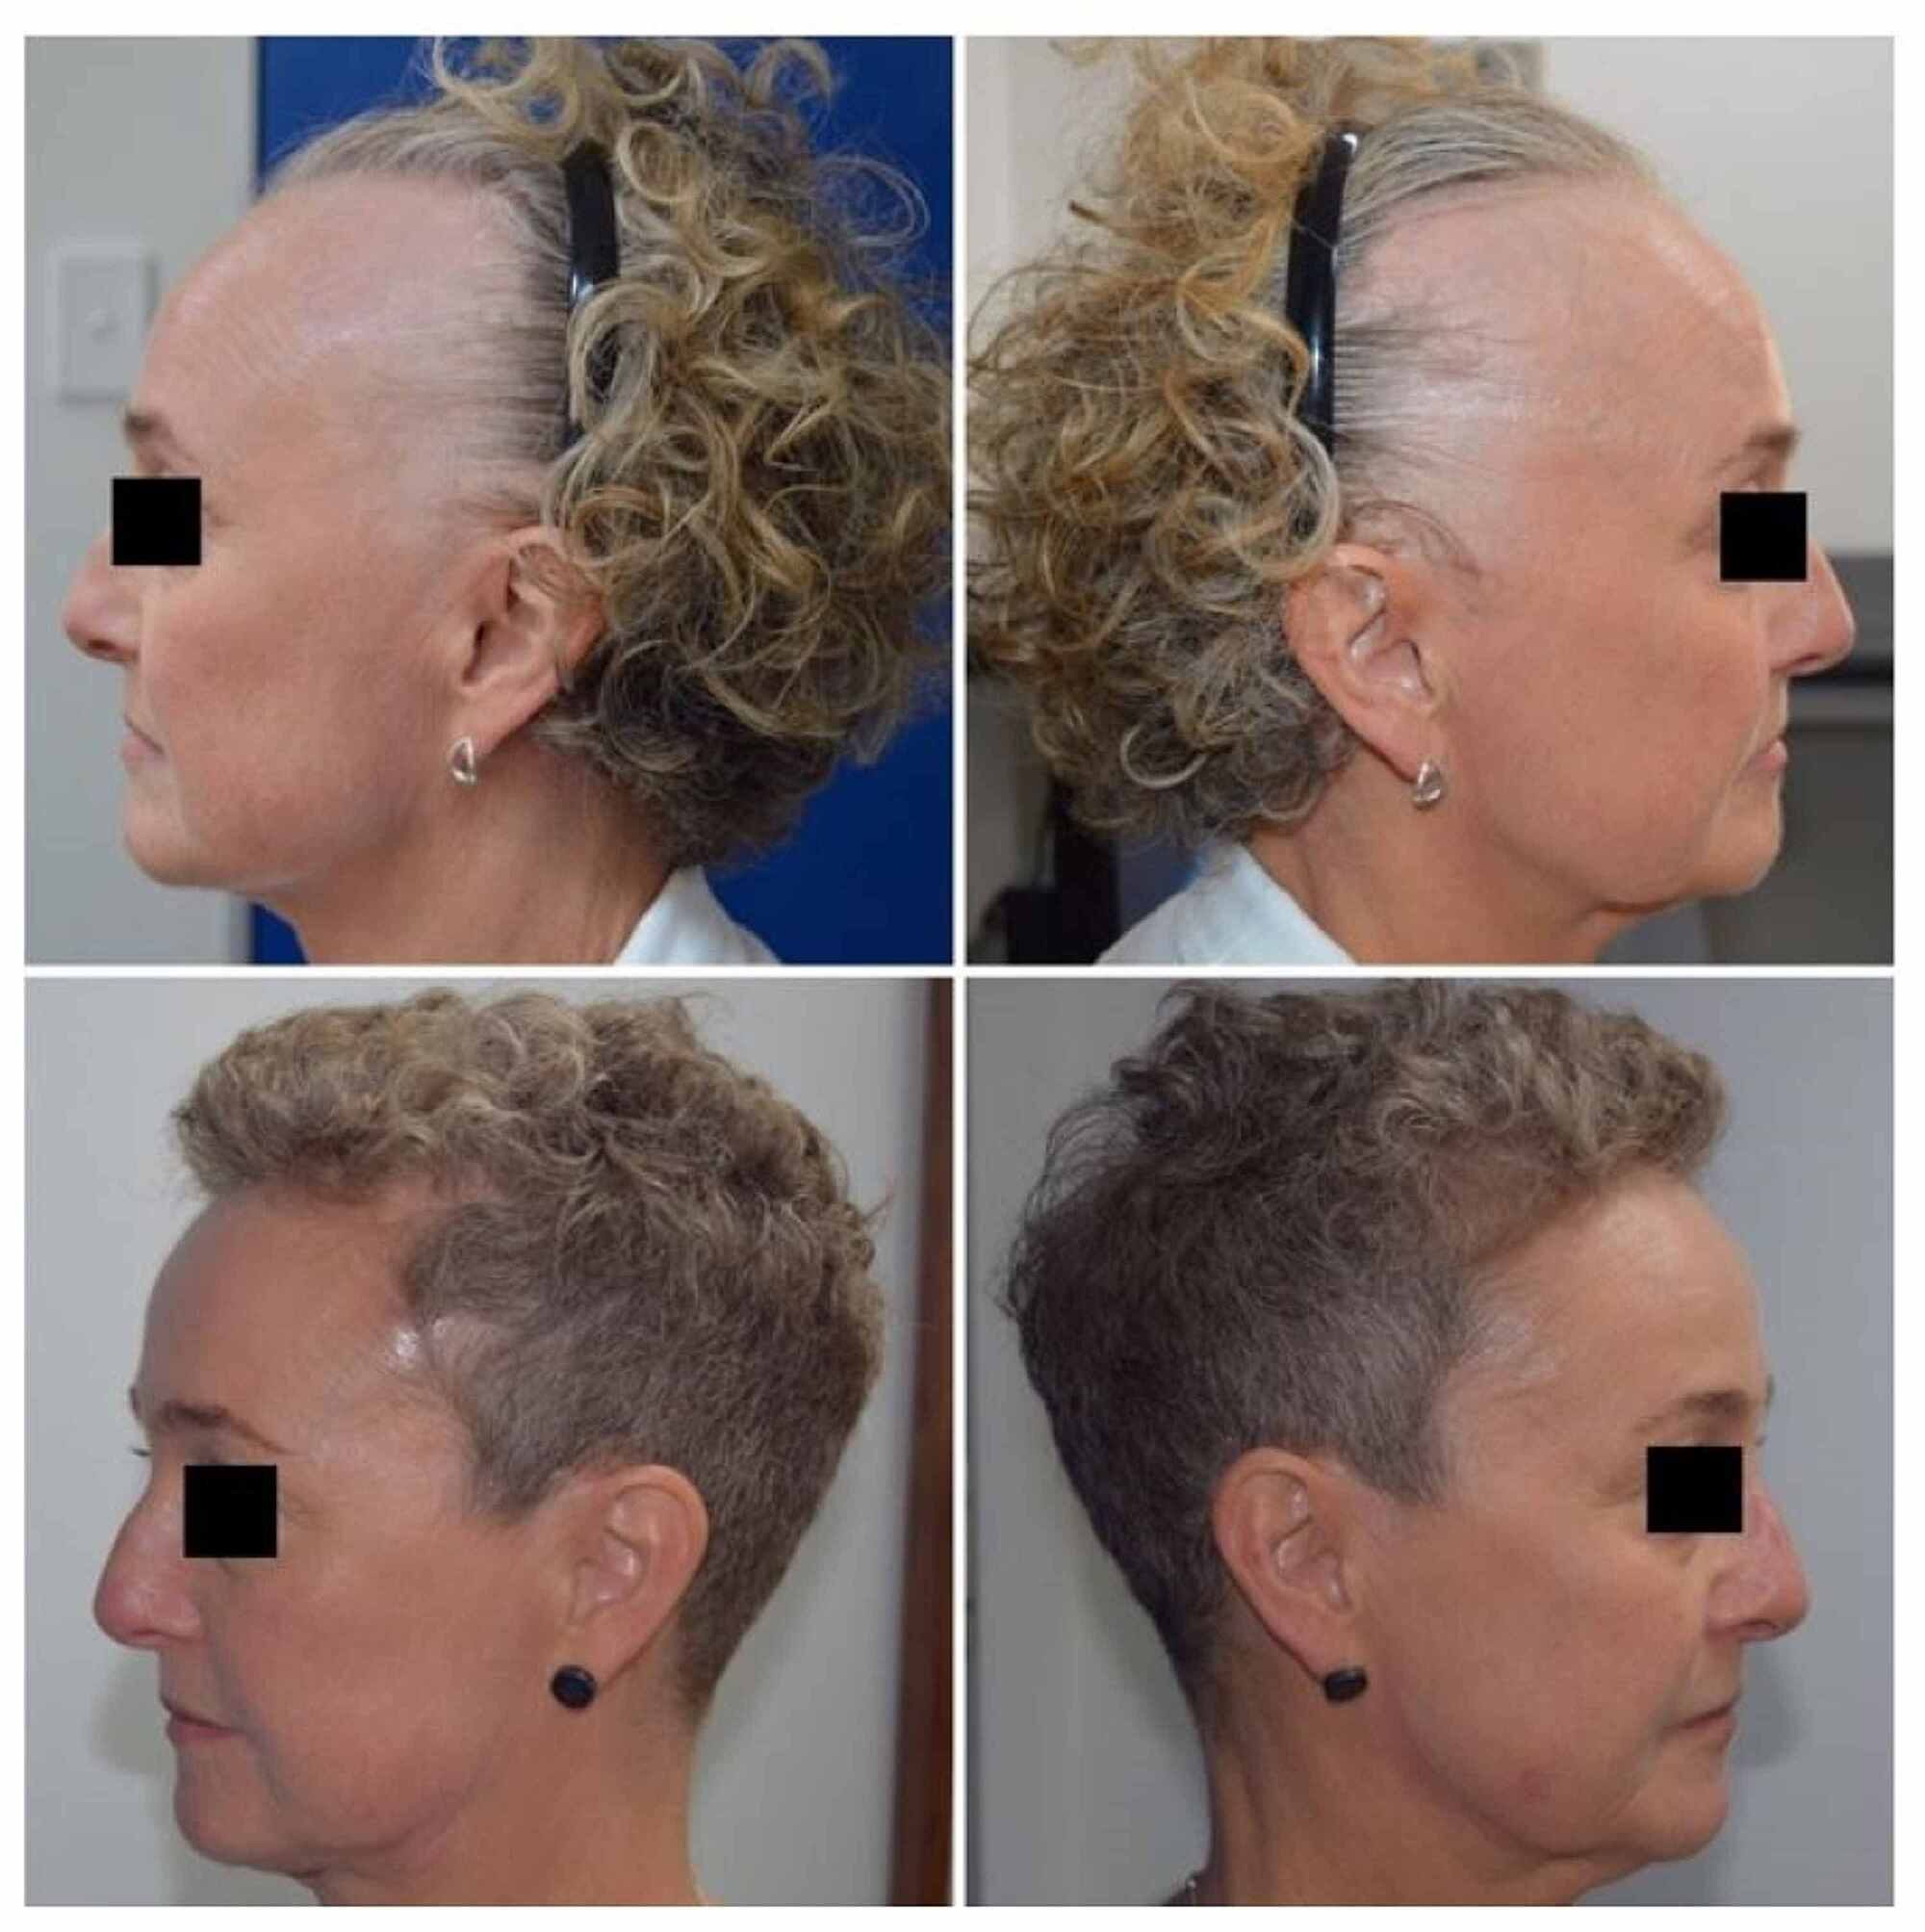 Reversal of Frontal Hair Loss from Propecia with Photos  WRassmanMD  BaldingBlog